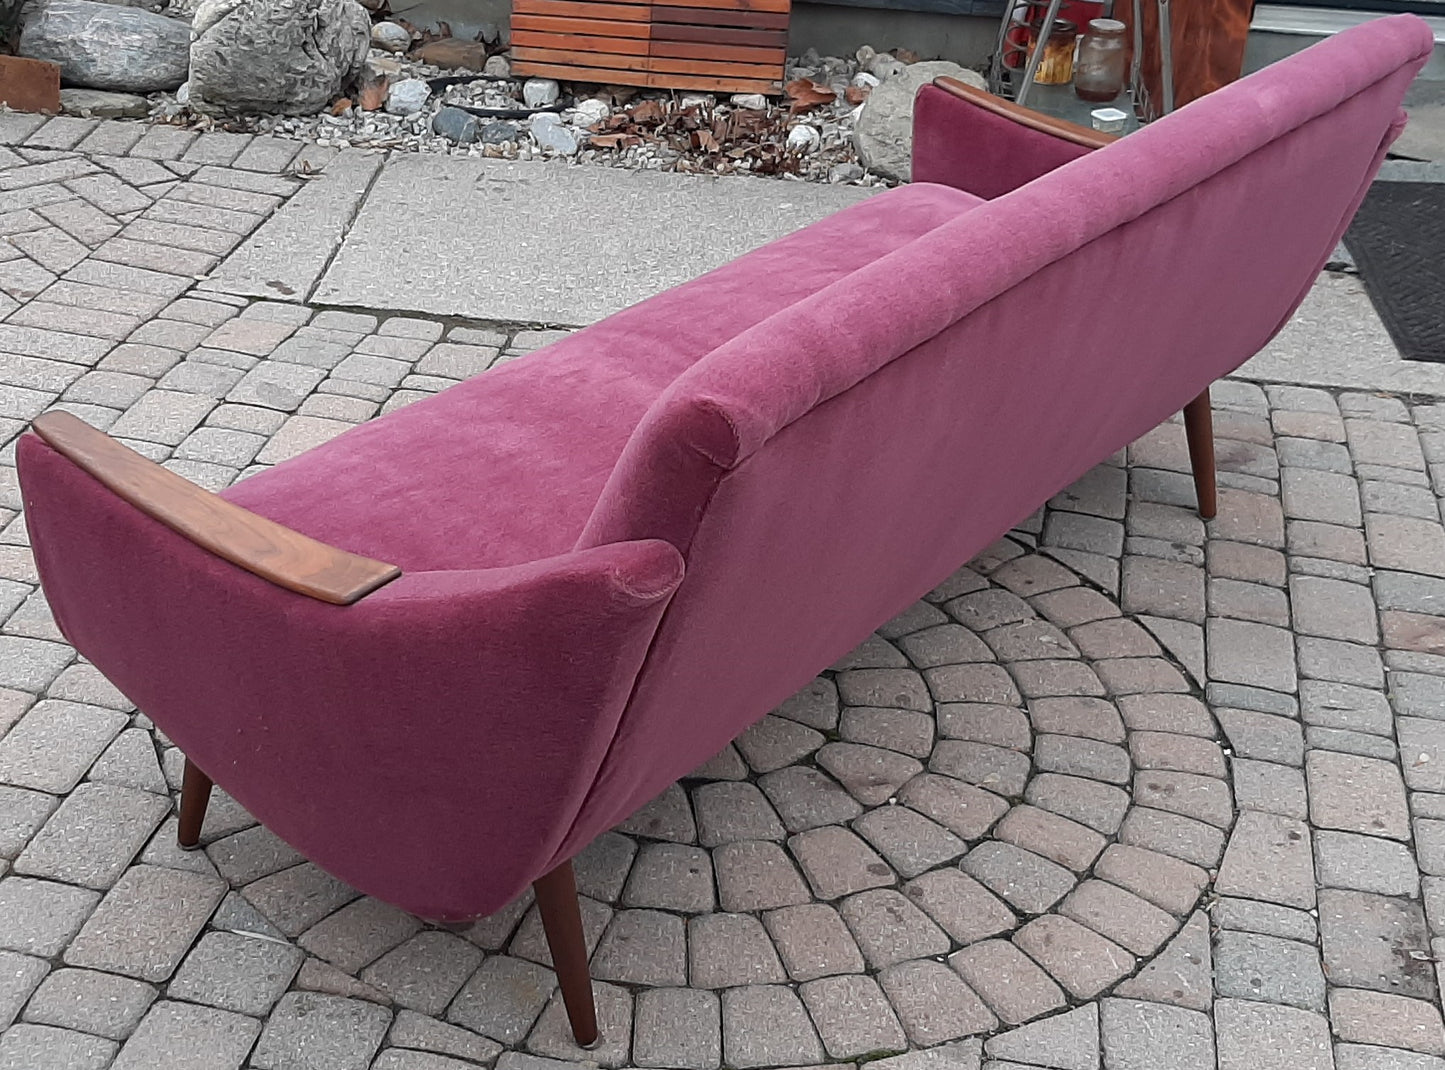 REFINISHED REUPHOLSTERED Danish MCM Sofa in Wool Mohair - PERFECT